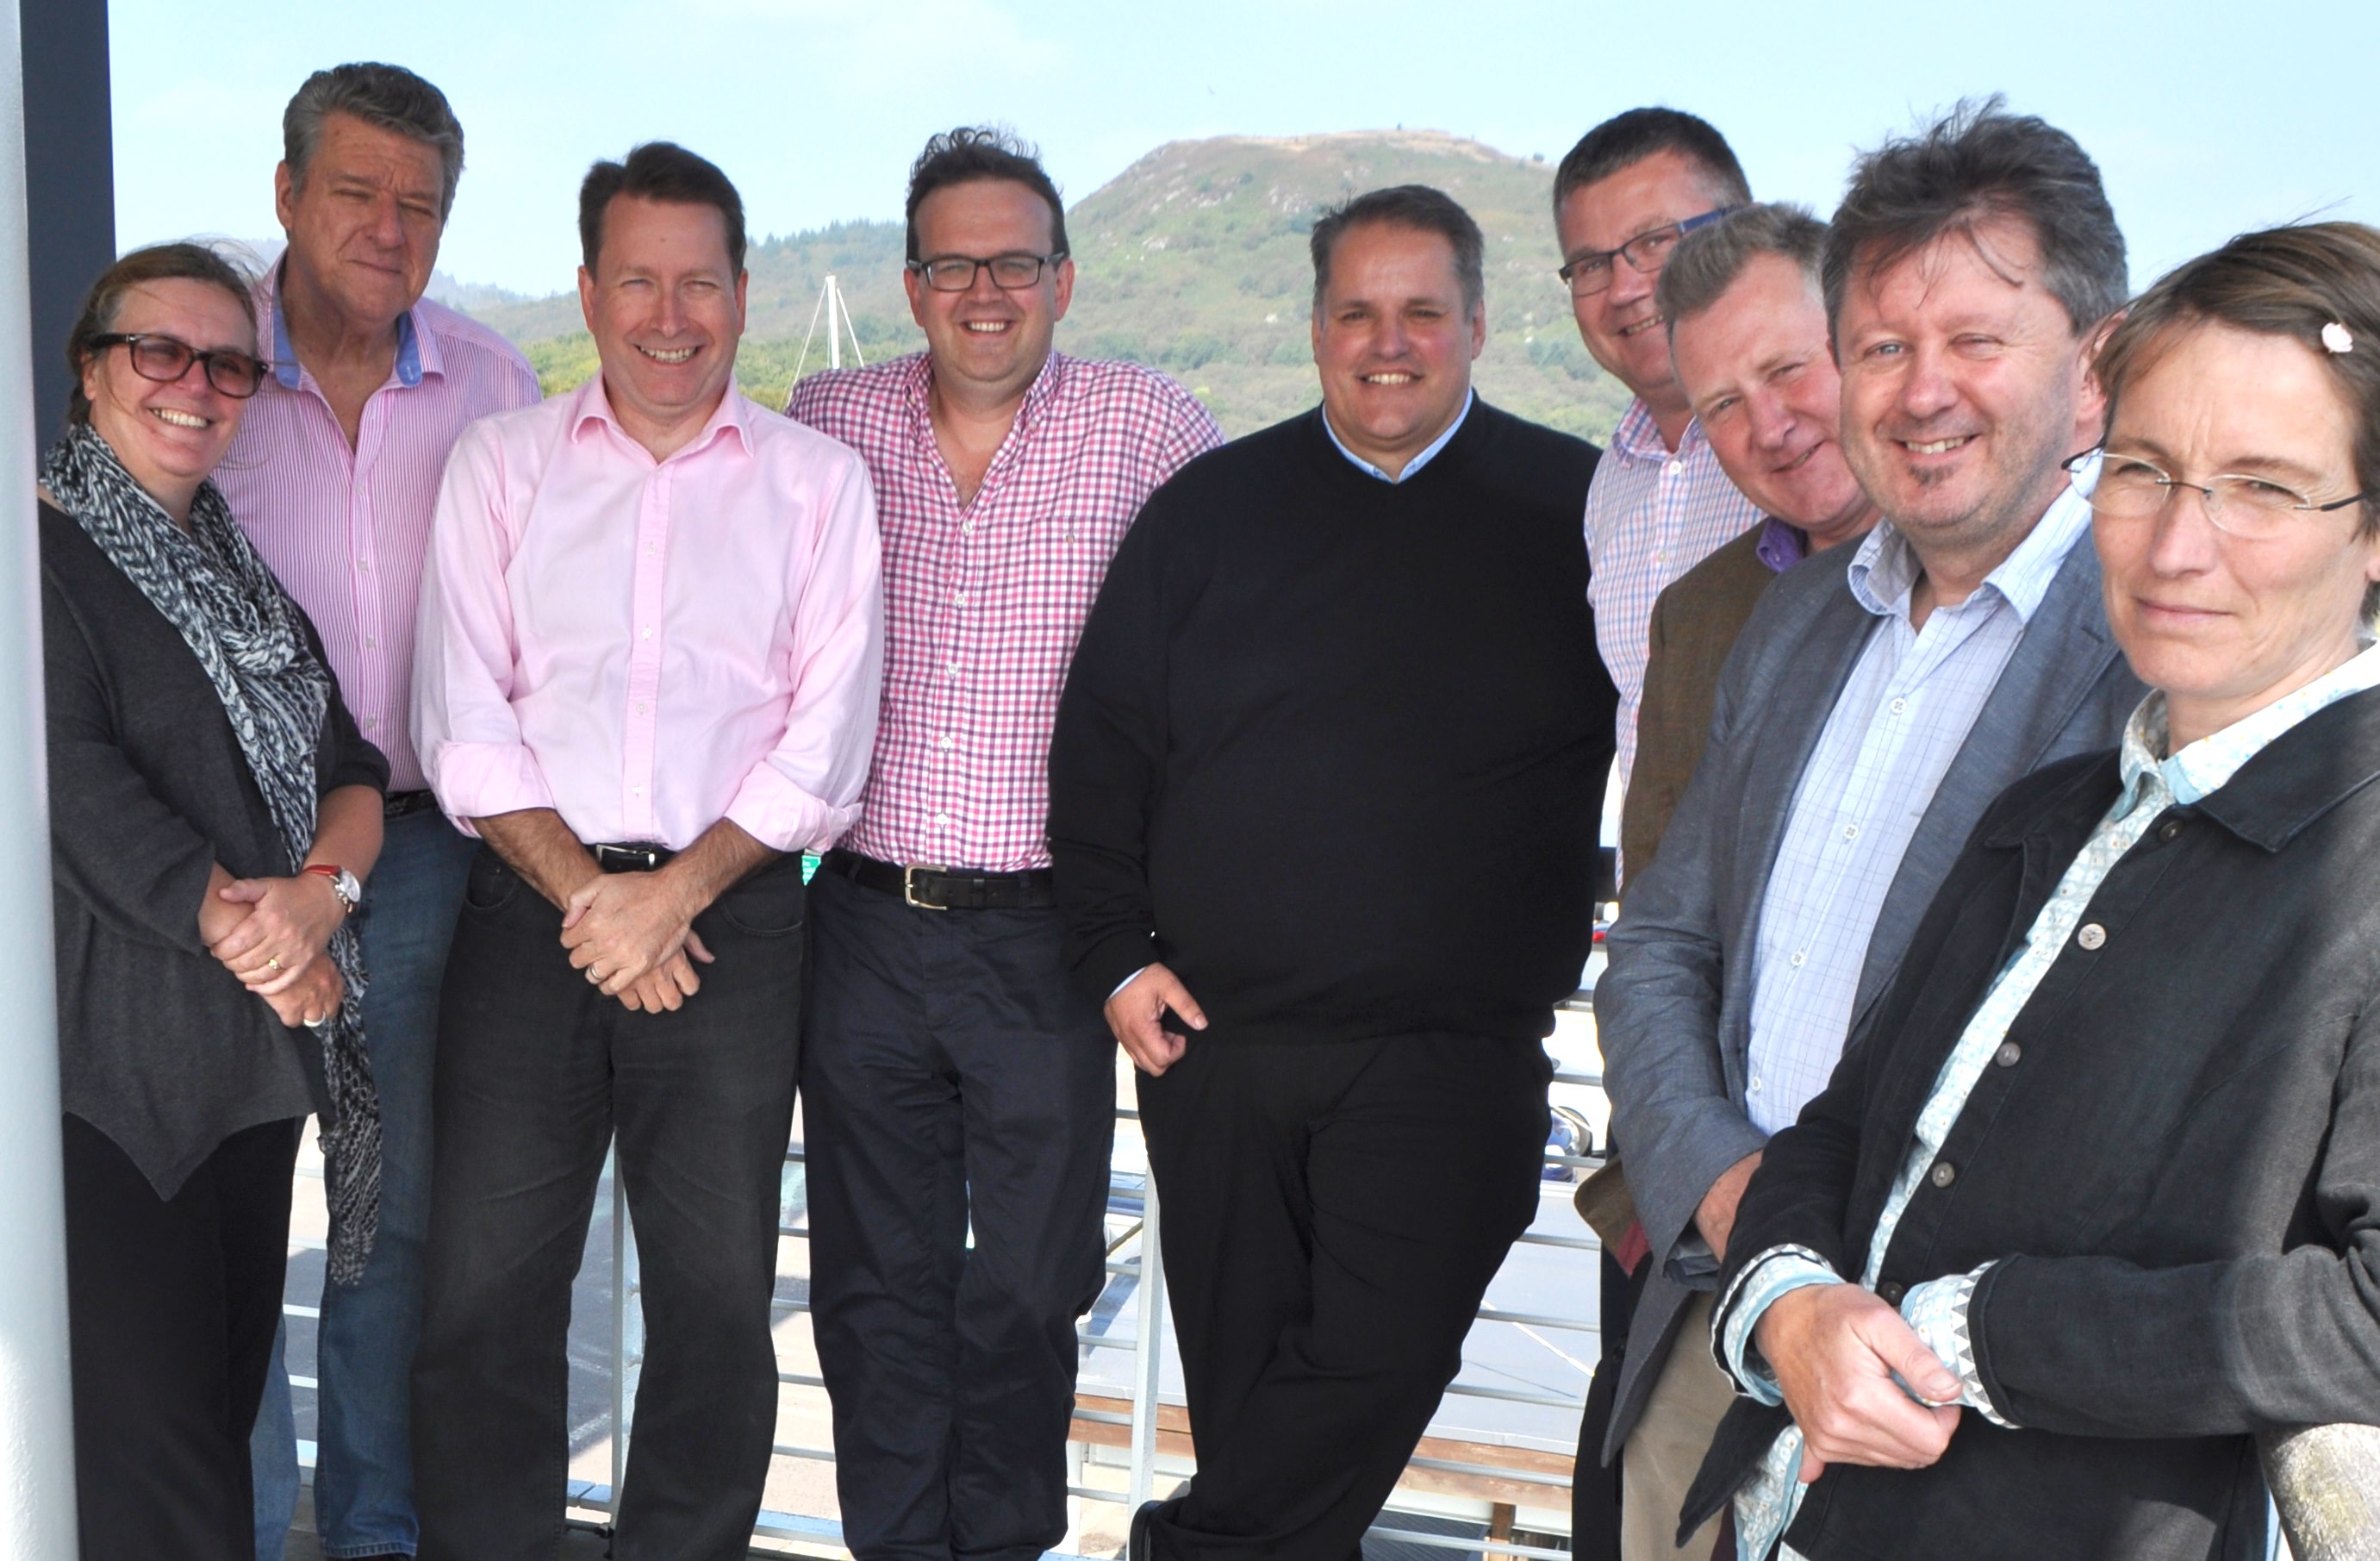 Argyll and the Isles Tourism Co-operative’s board. From left, Carron Tobin, David Currie, Calum Ross, Niall Macalister Hall, chairman Gavin Dick, Iain Jurgensen, Andrew Wilson, Brian Keating and Fiona McPhail.